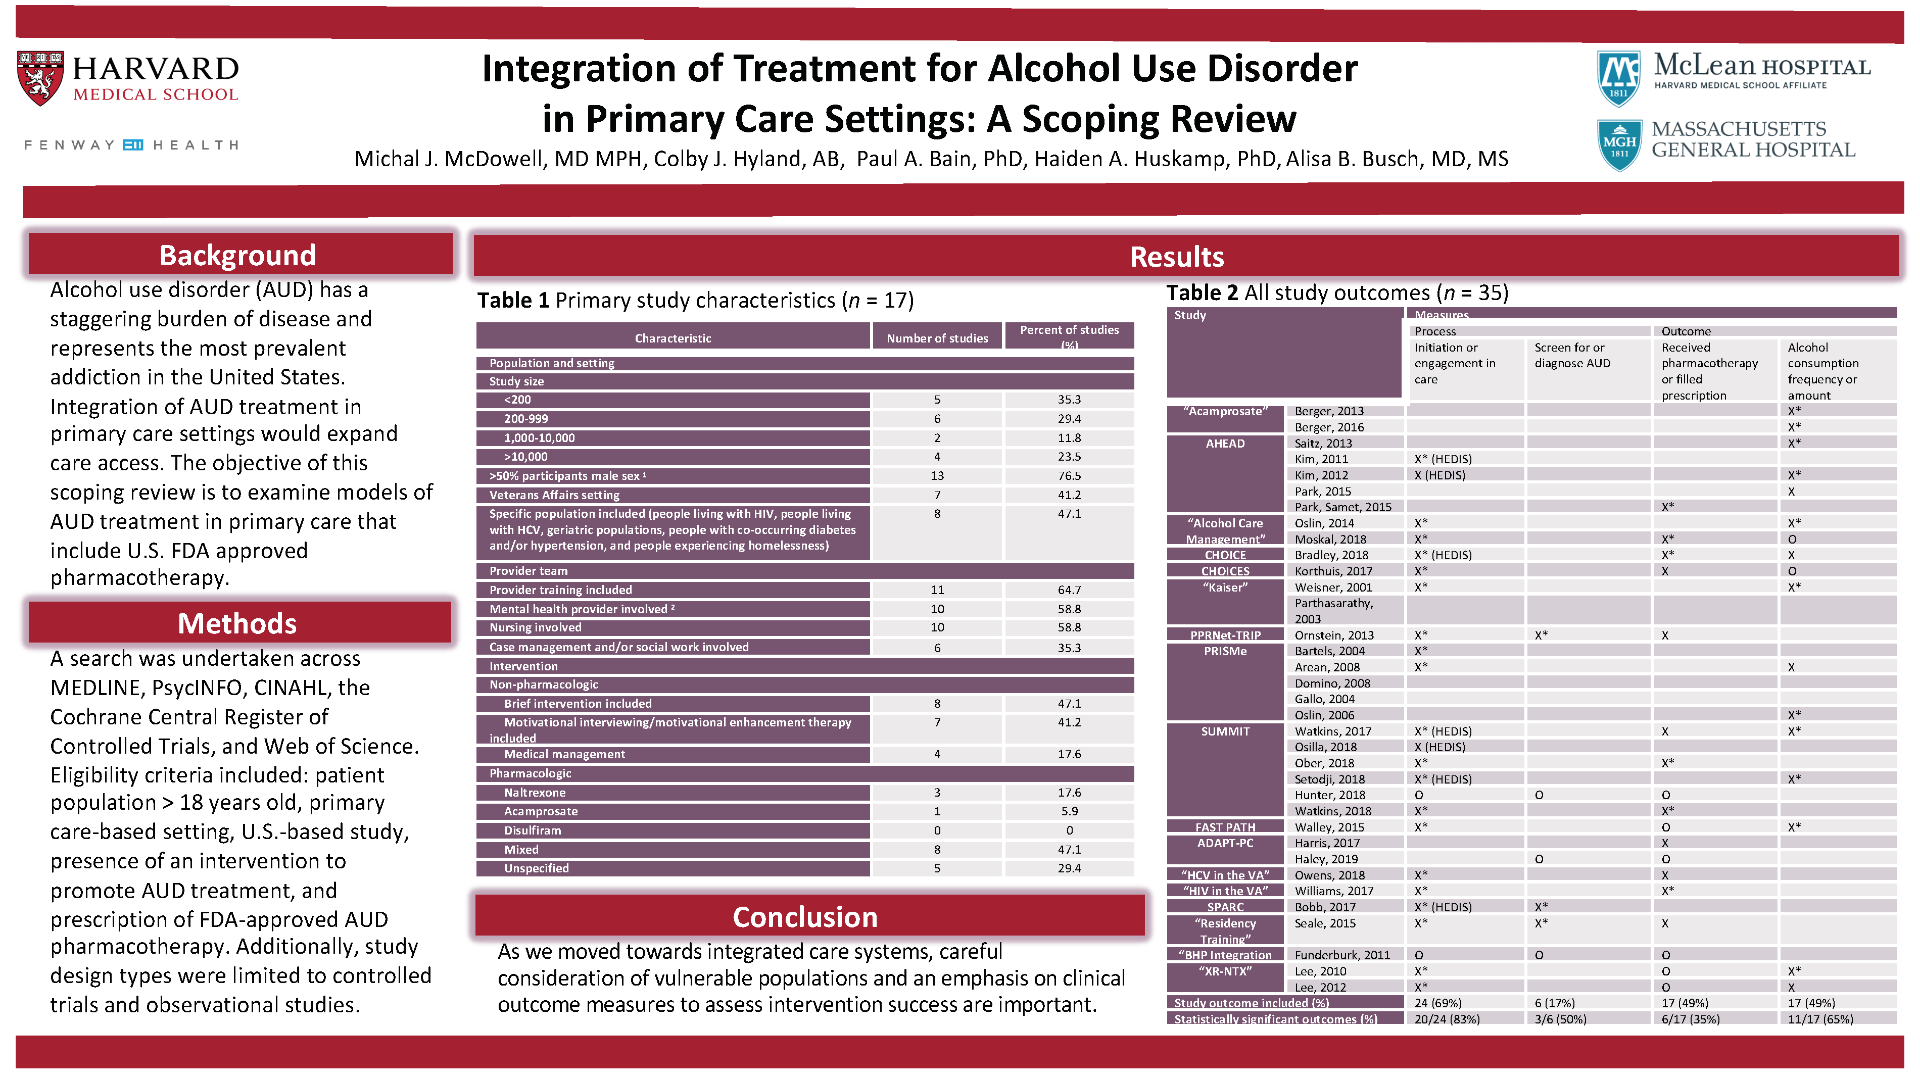 Integration of treatment for alcohol use disorder in primary care settings: a scoping review